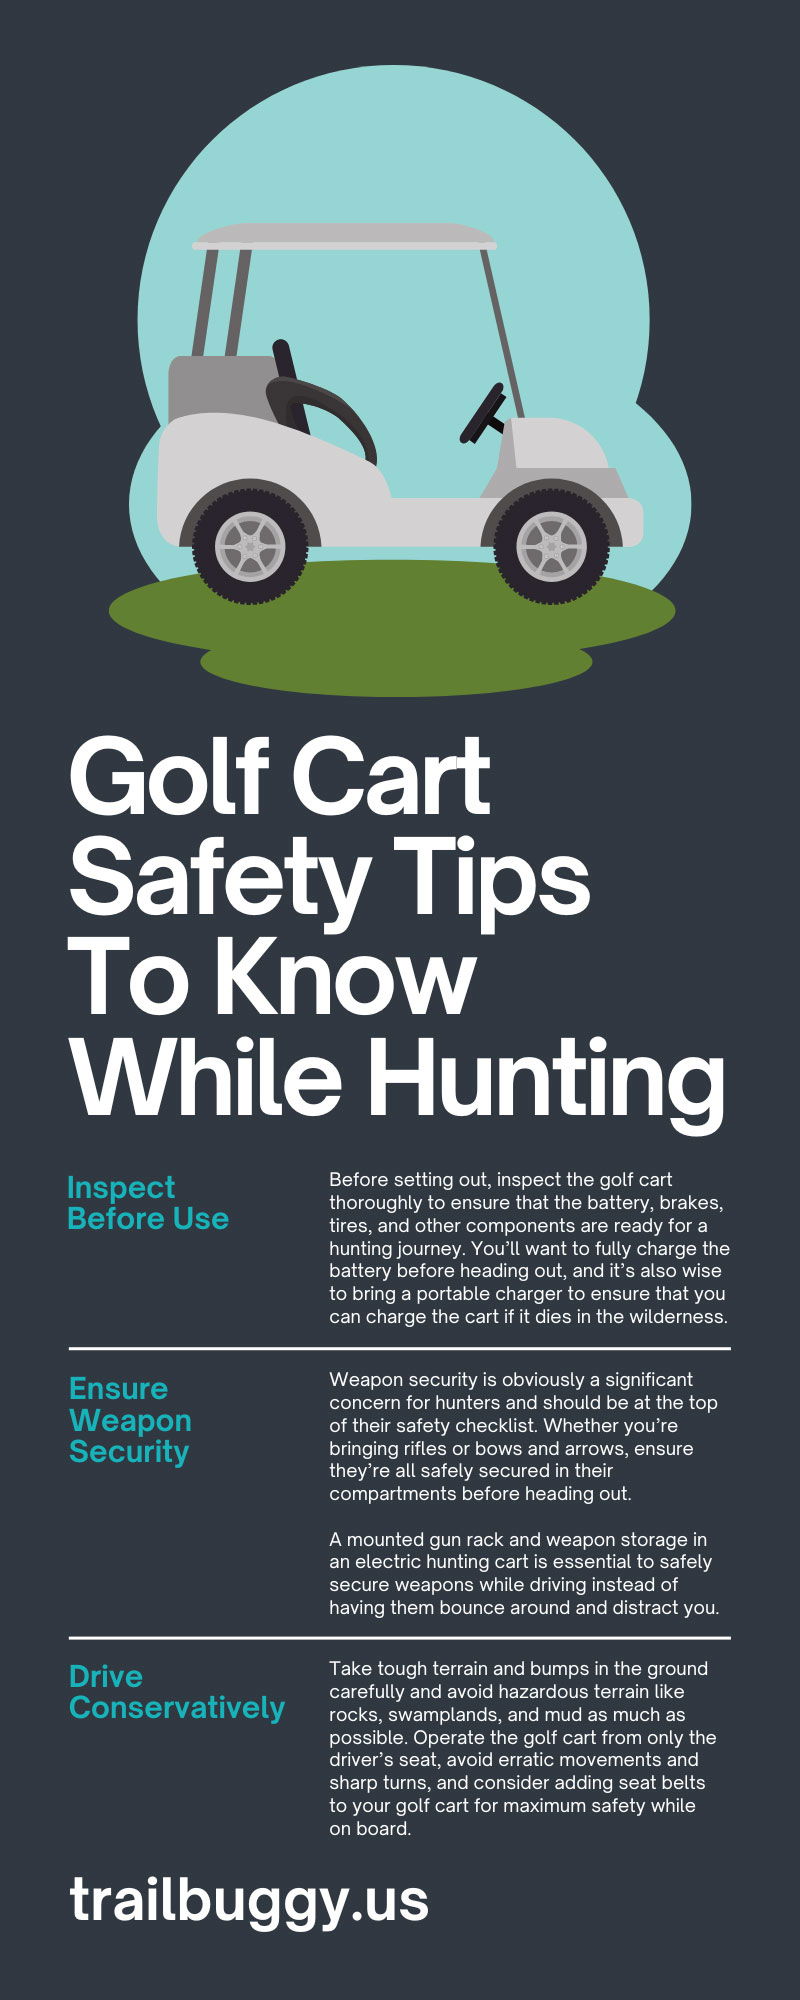 Golf Cart Safety Tips To Know While Hunting